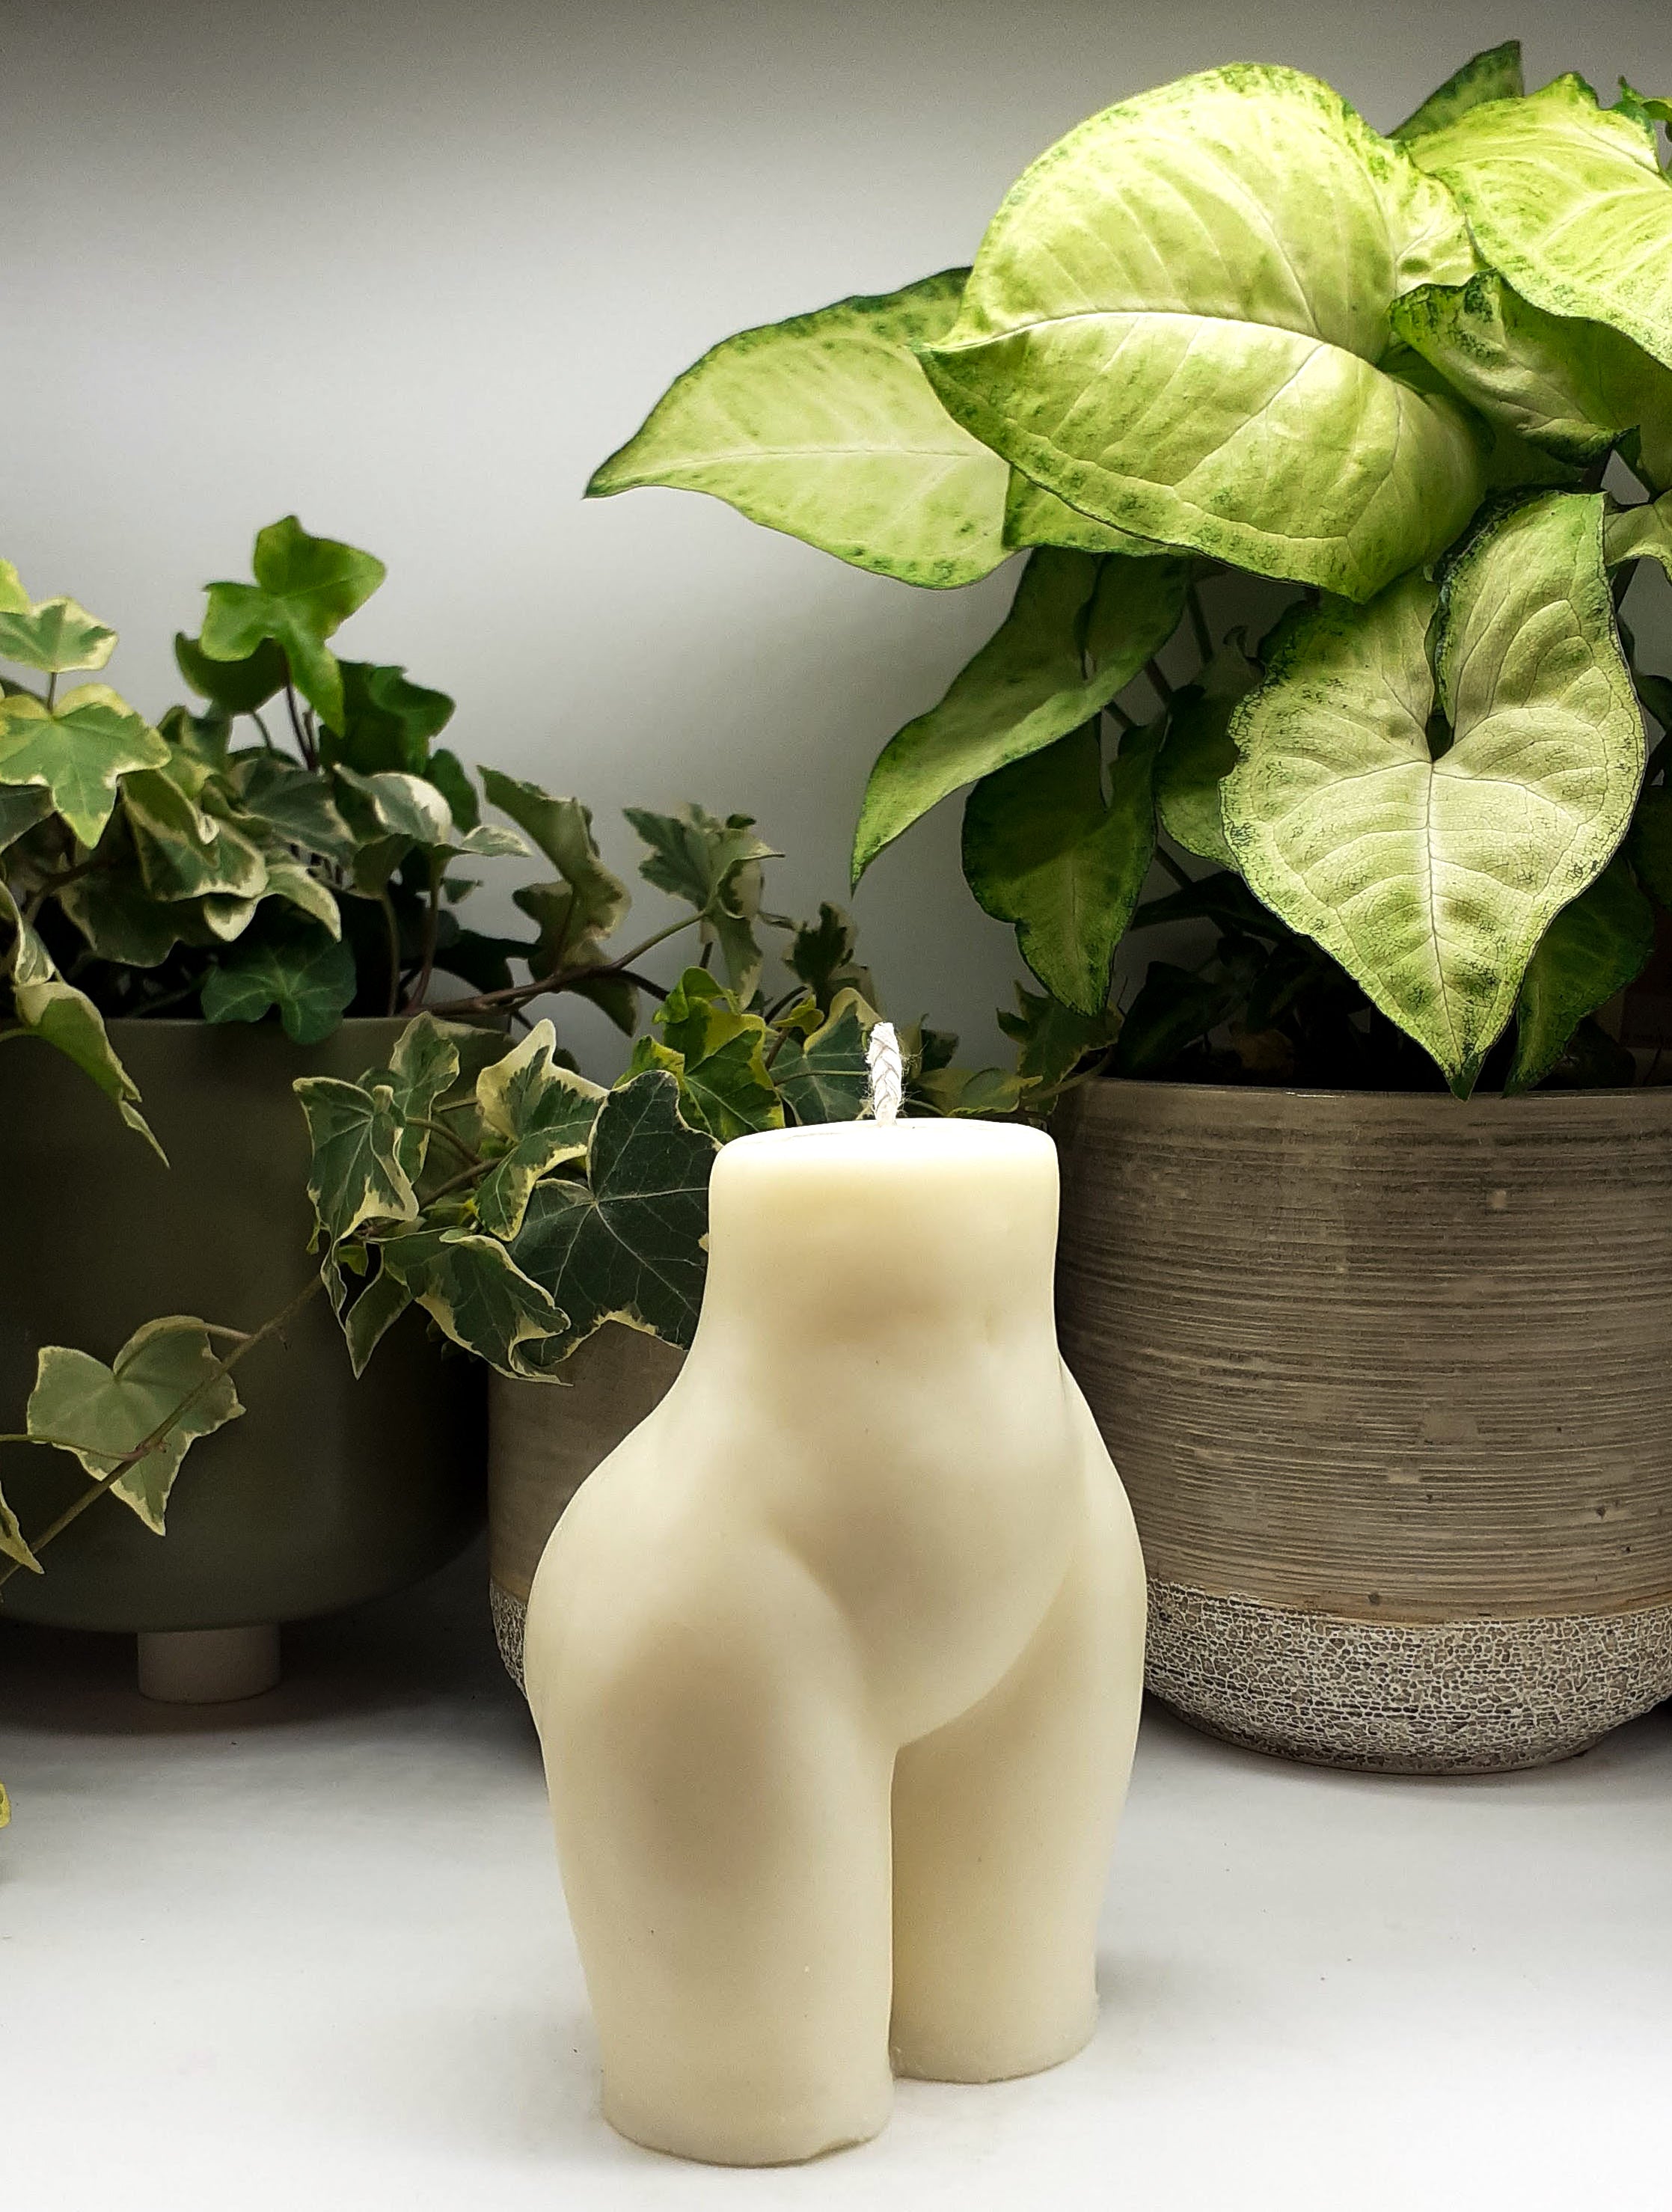 Body Candle